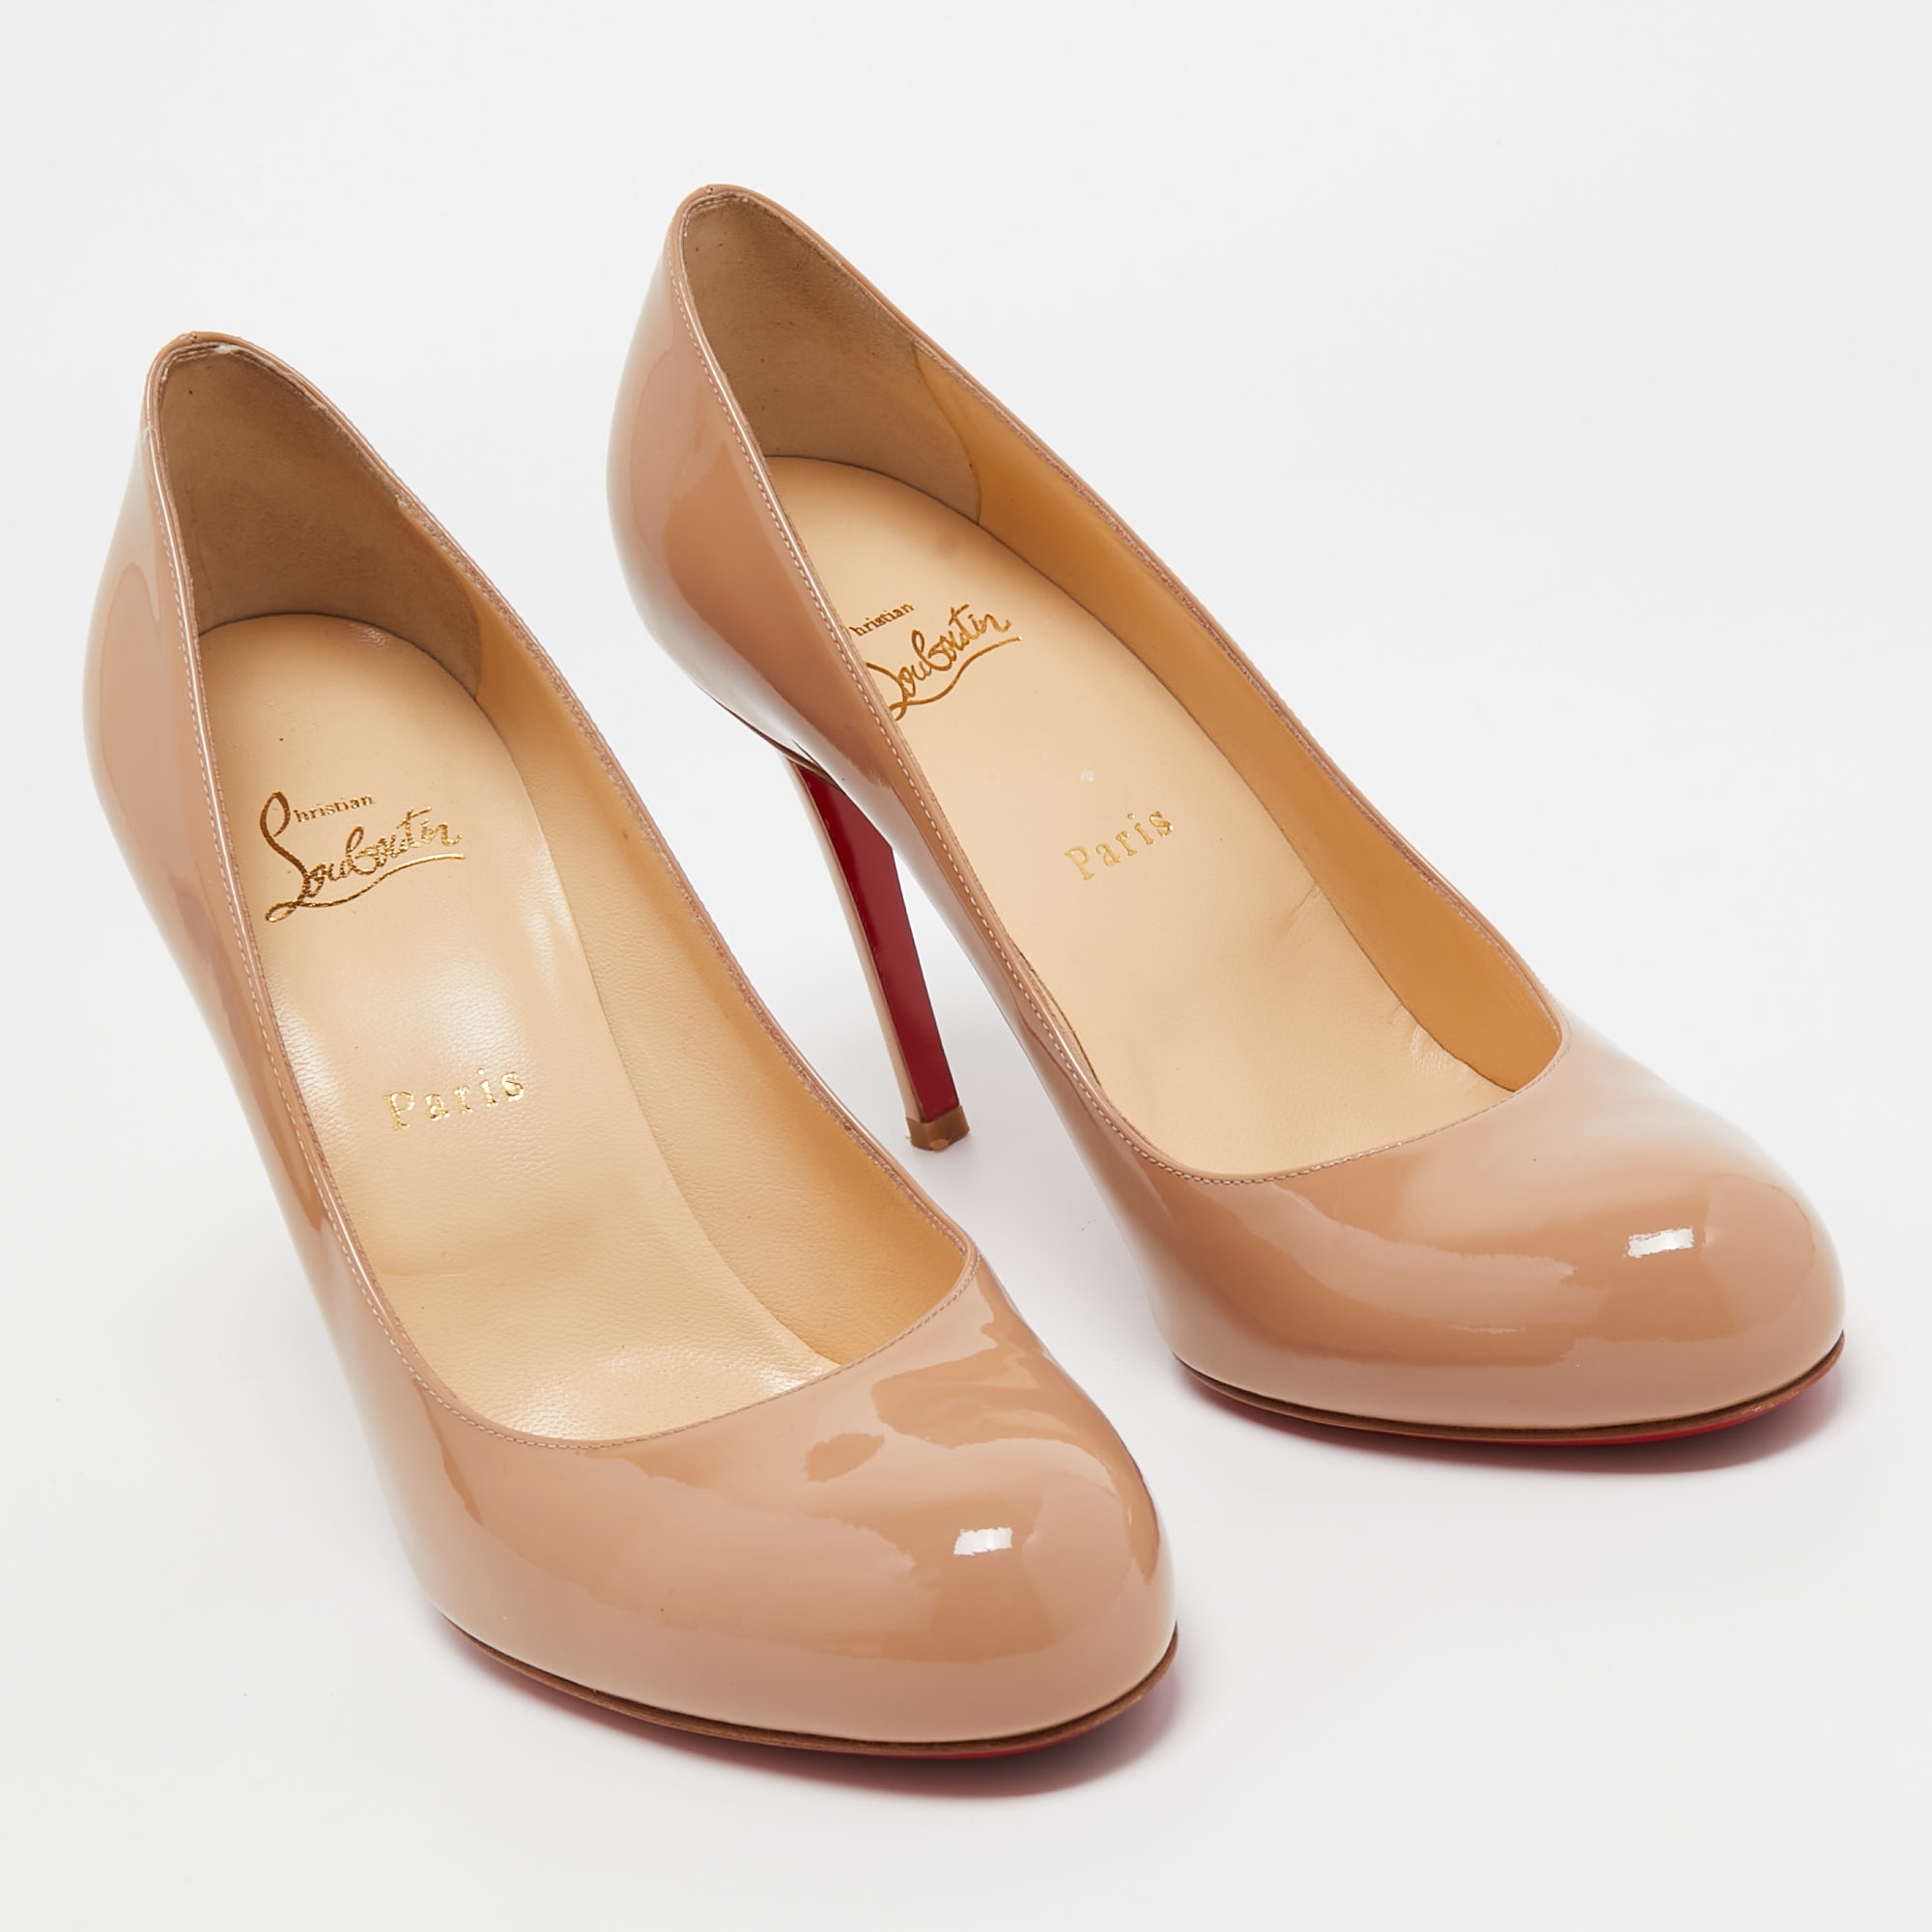 Christian Louboutin Beige Patent Leather Simple Pumps Size 41